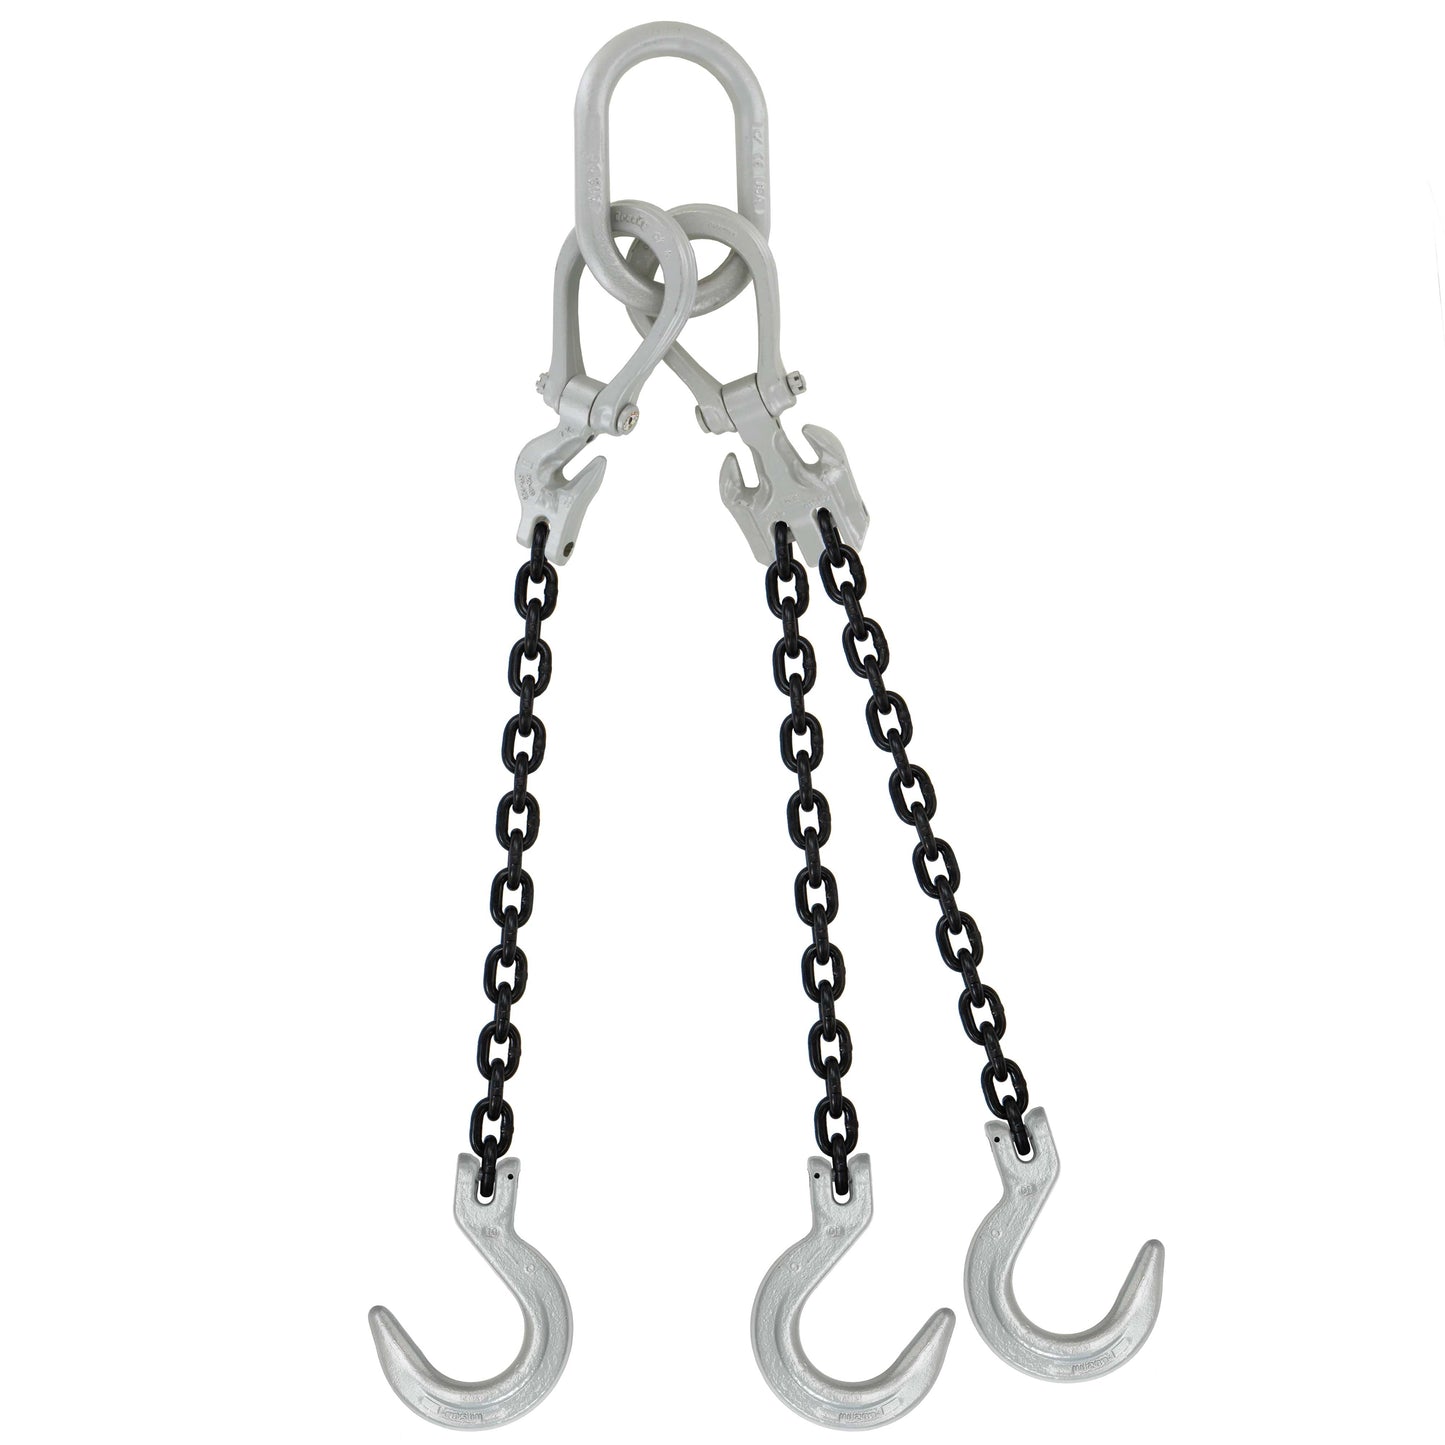 38 inch x 20 foot Domestic Adjustable 3 Leg Chain Sling w Crosby Foundry Hooks Grade 100 image 1 of 2